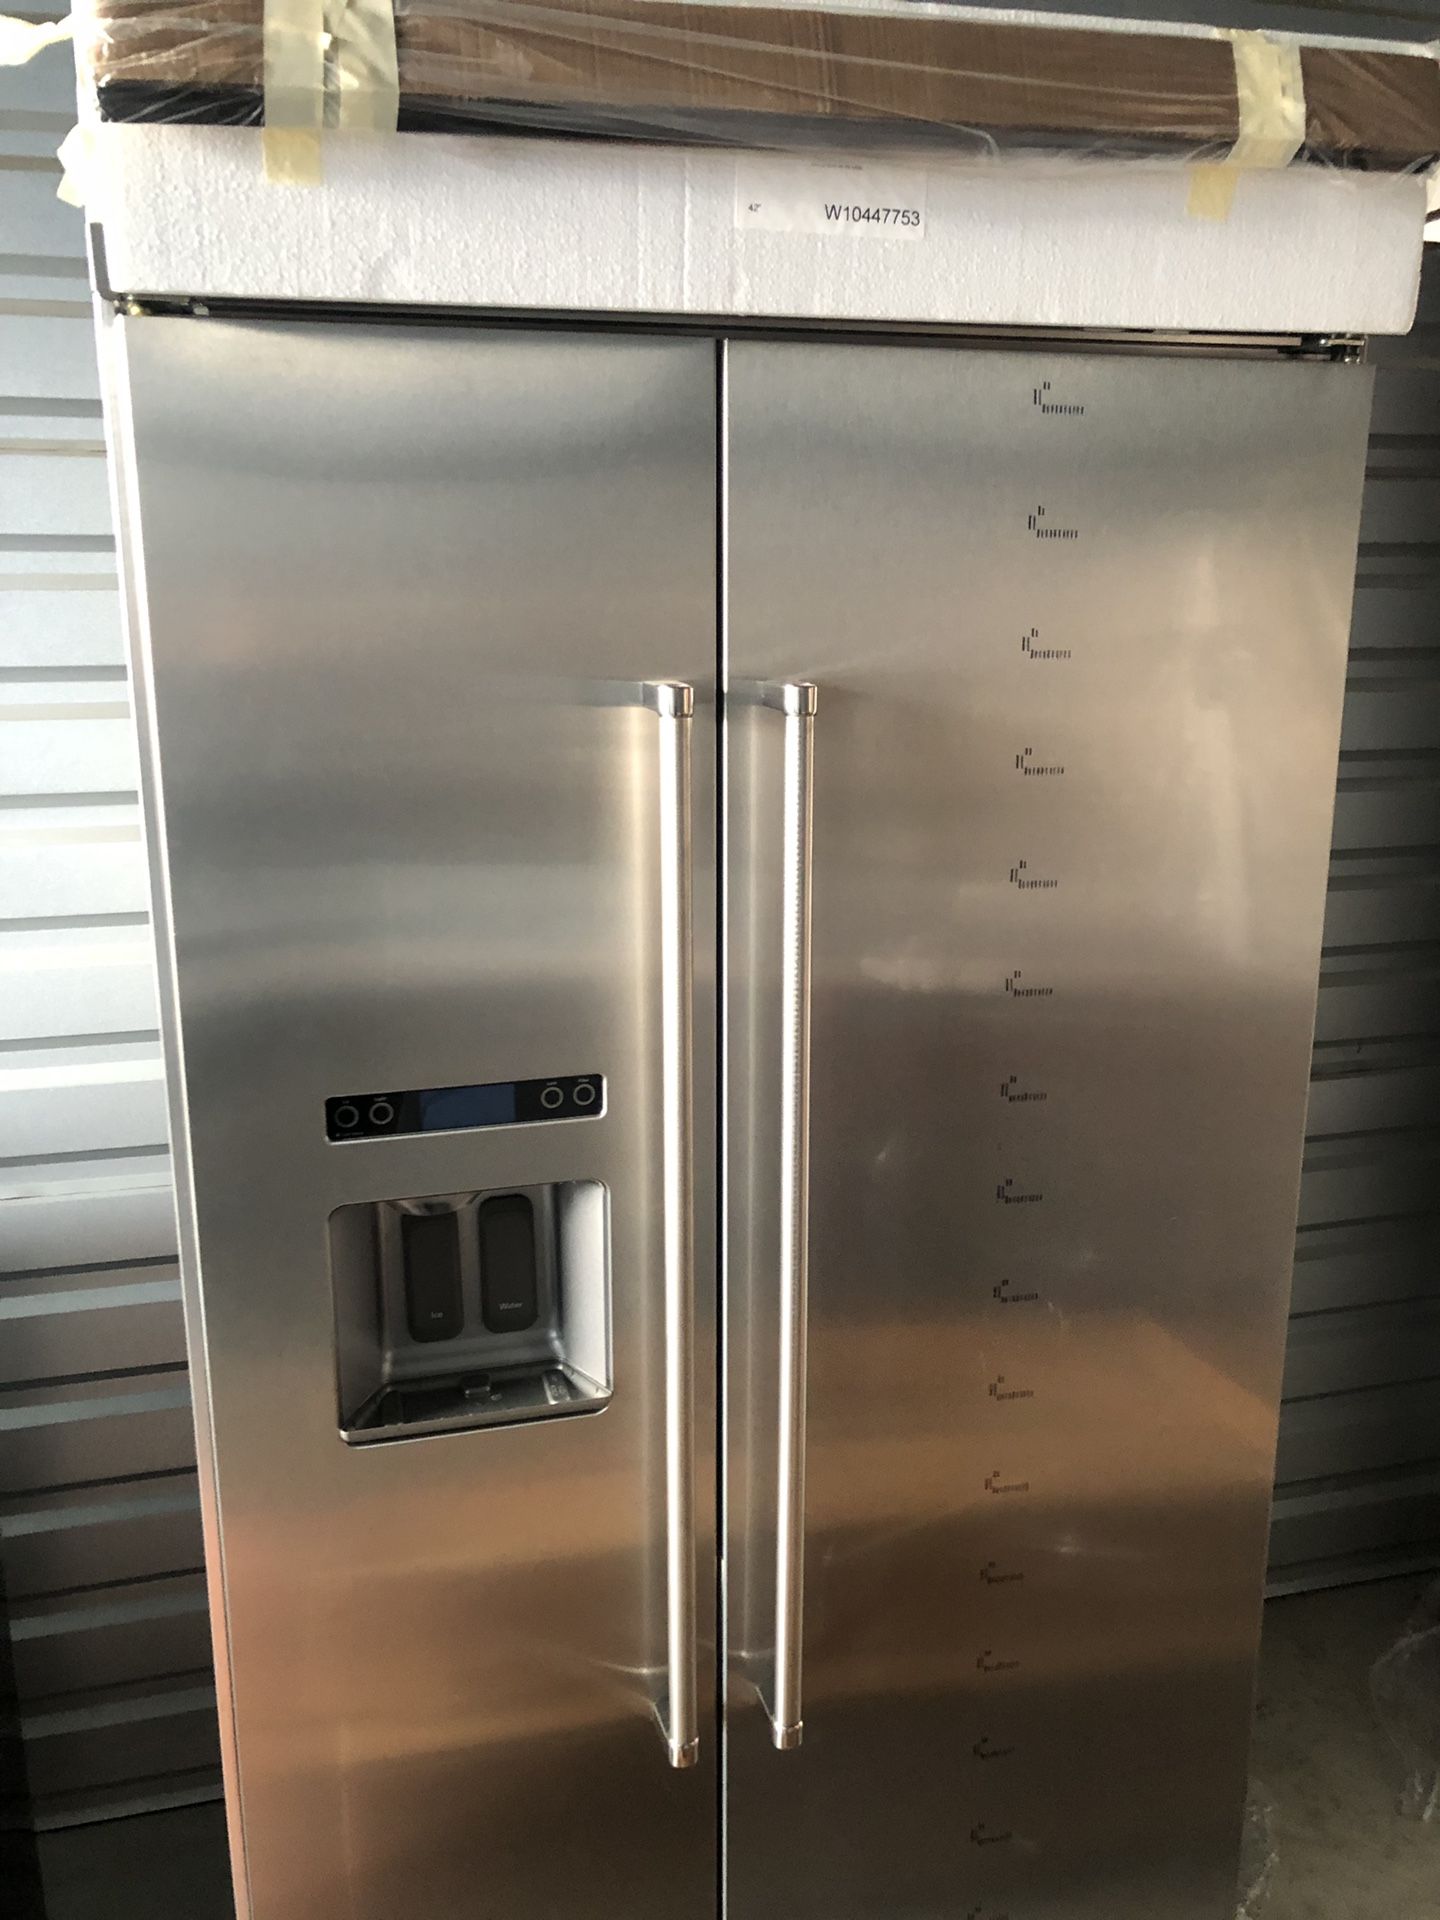 BRAND NEW KitchenAid 25 cu. ft. Built-In Side by Side Refrigerator in Stainless Steel Model # KBSD602ESS Delivery available retail is 9,000.00